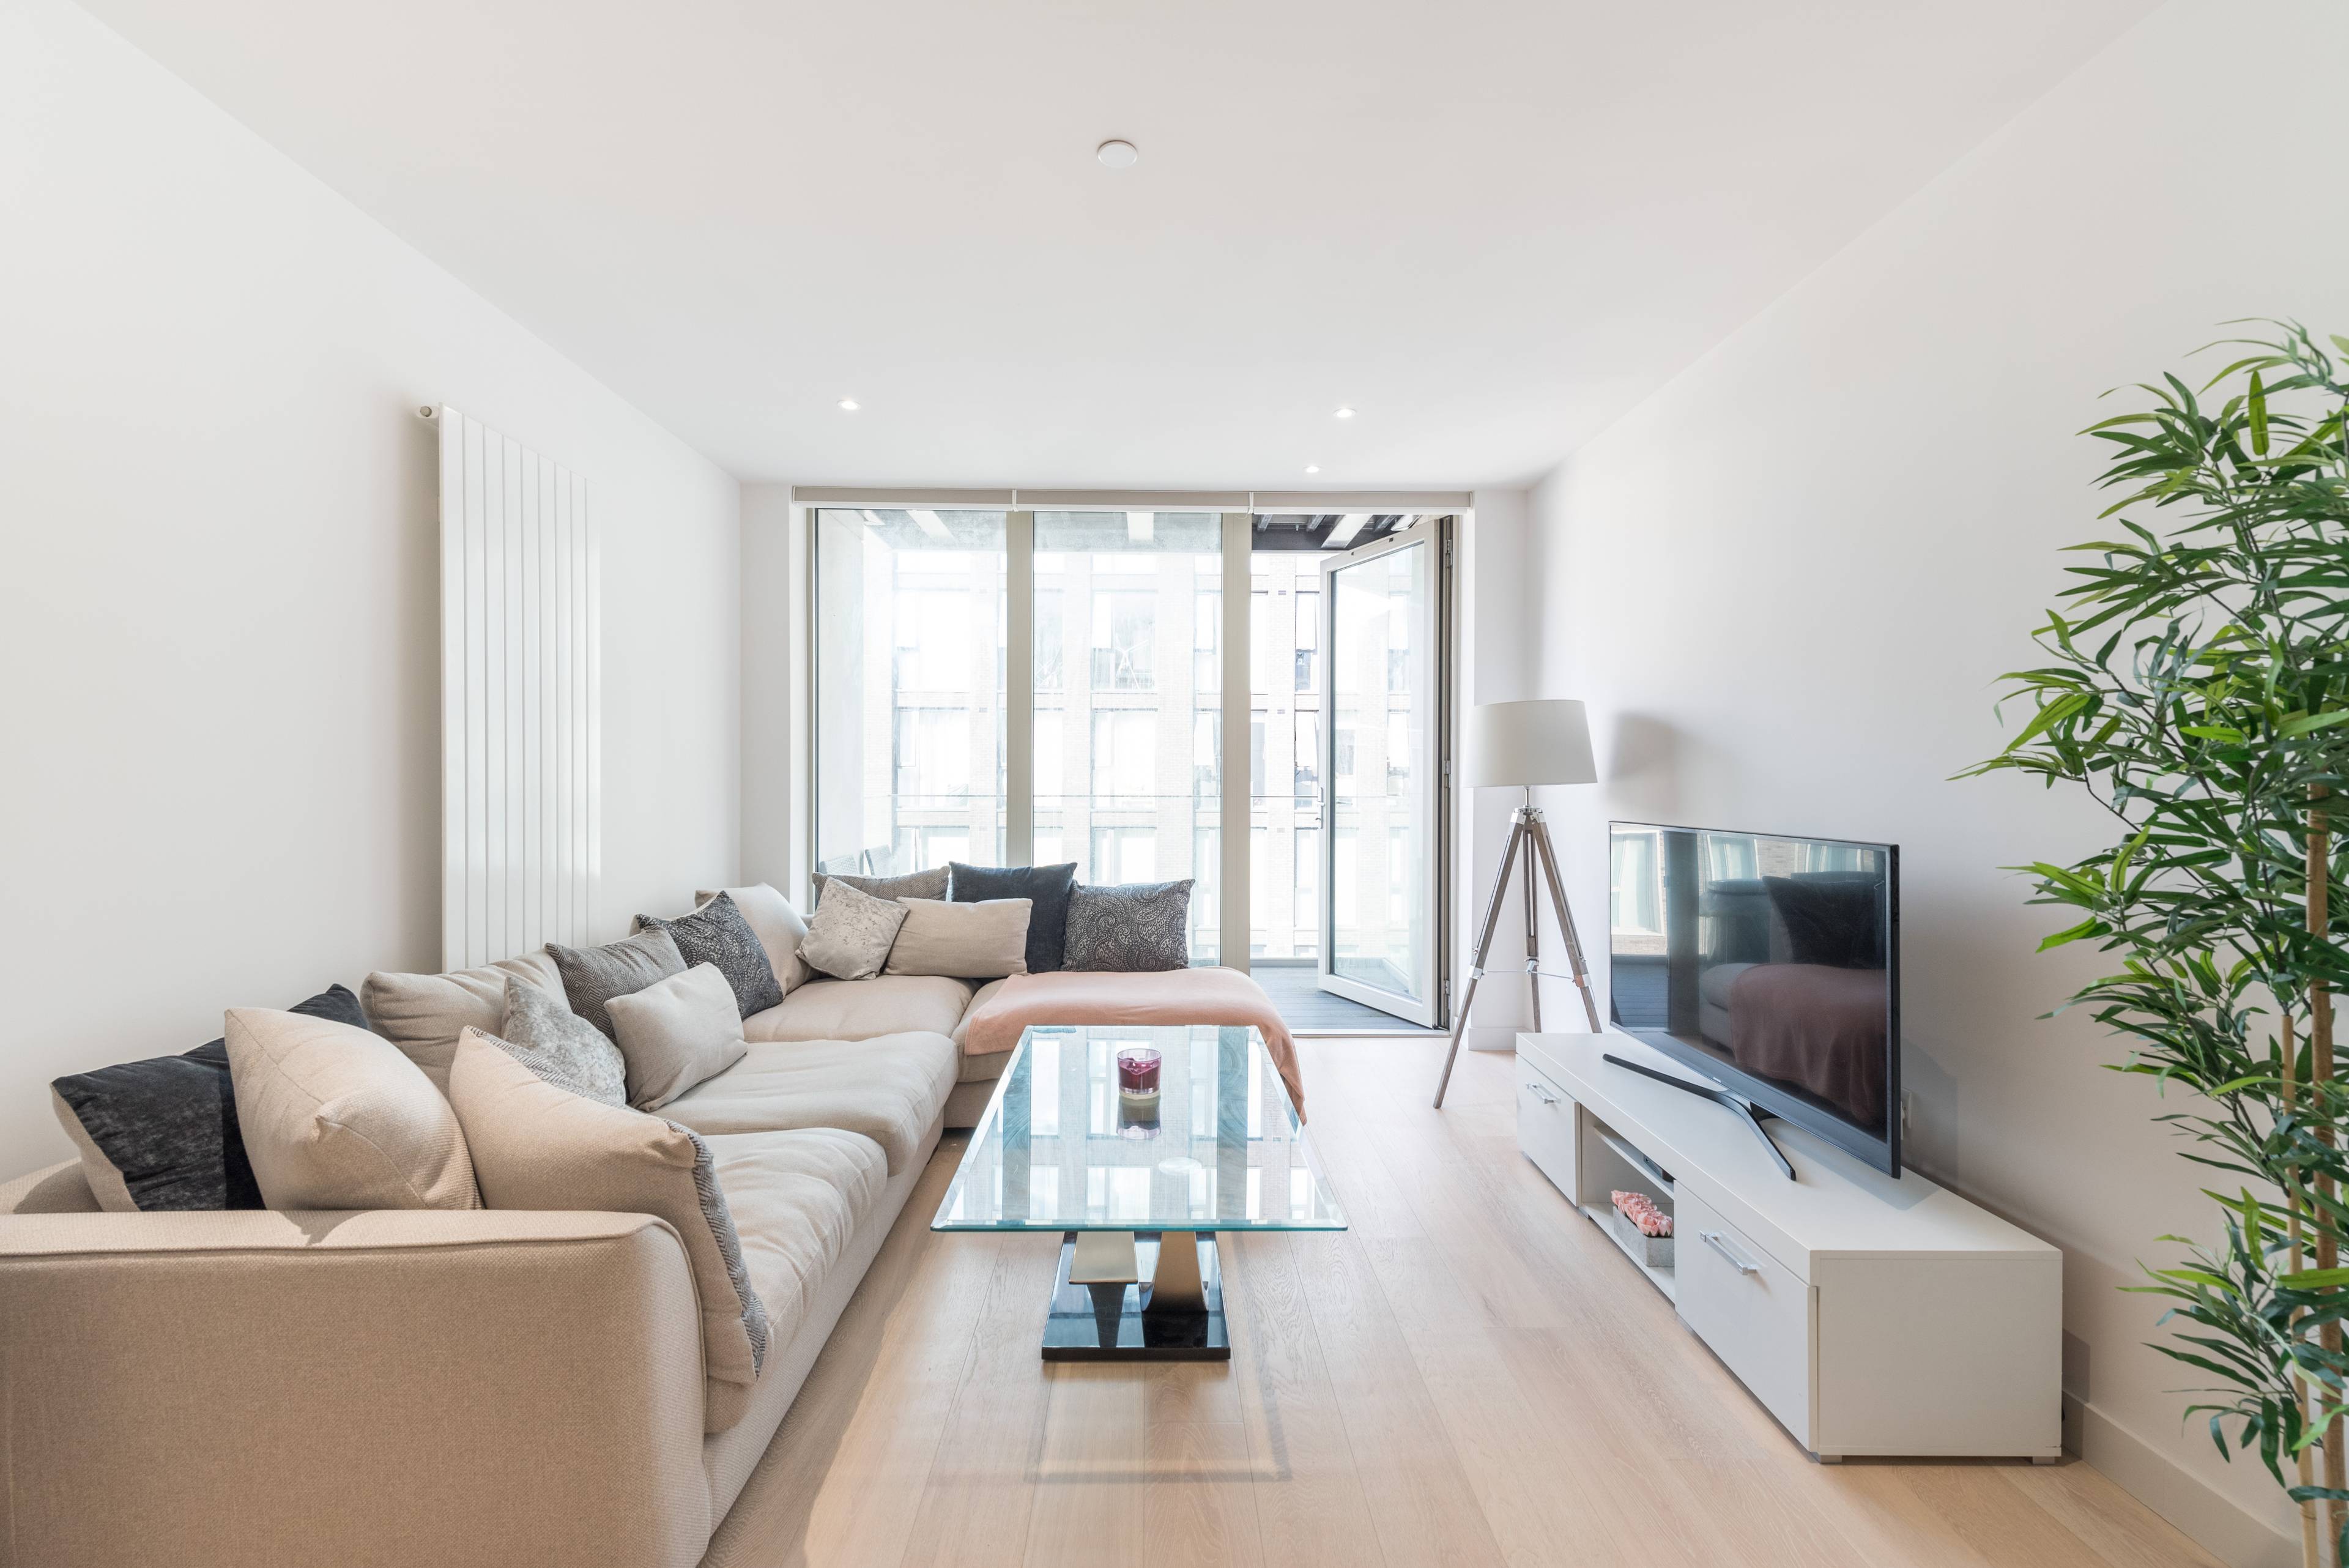 The Royal Wharf community continues to thrive. Now we invite you to be part of this successful environment through the opportunity to own this spacious two-bedroom, two-bathroom apartment.